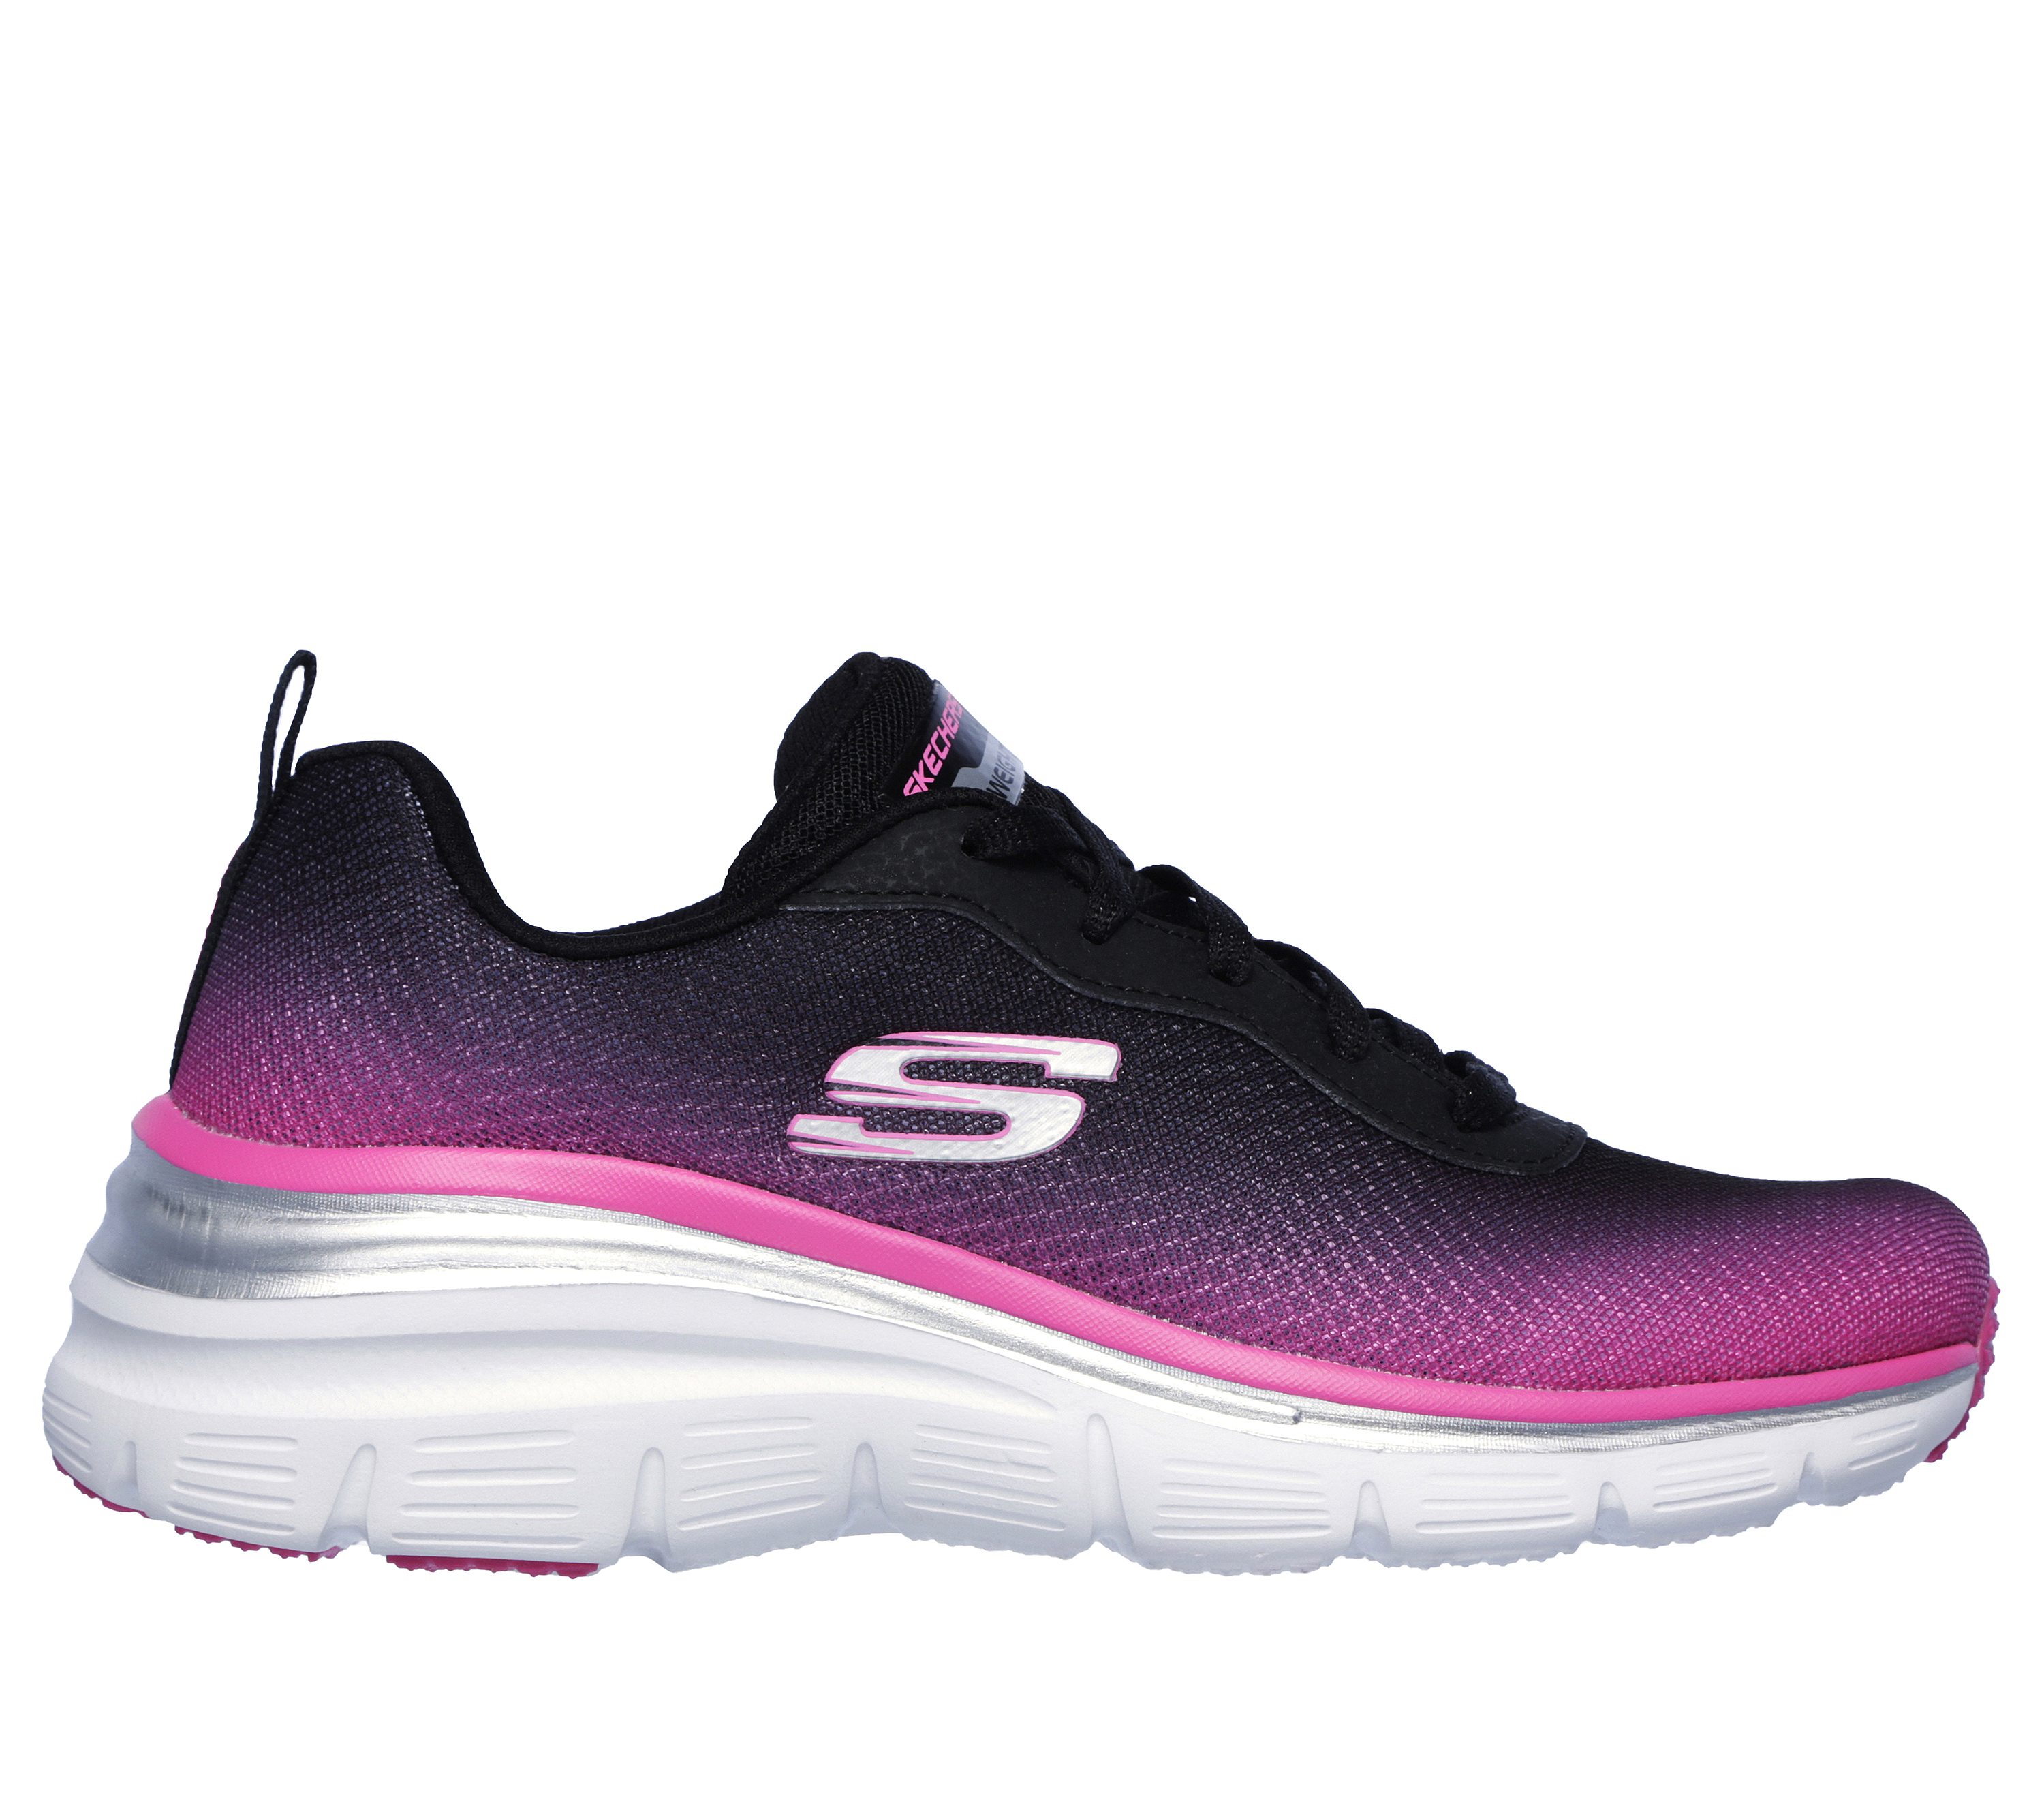 skechers new shoes 2017